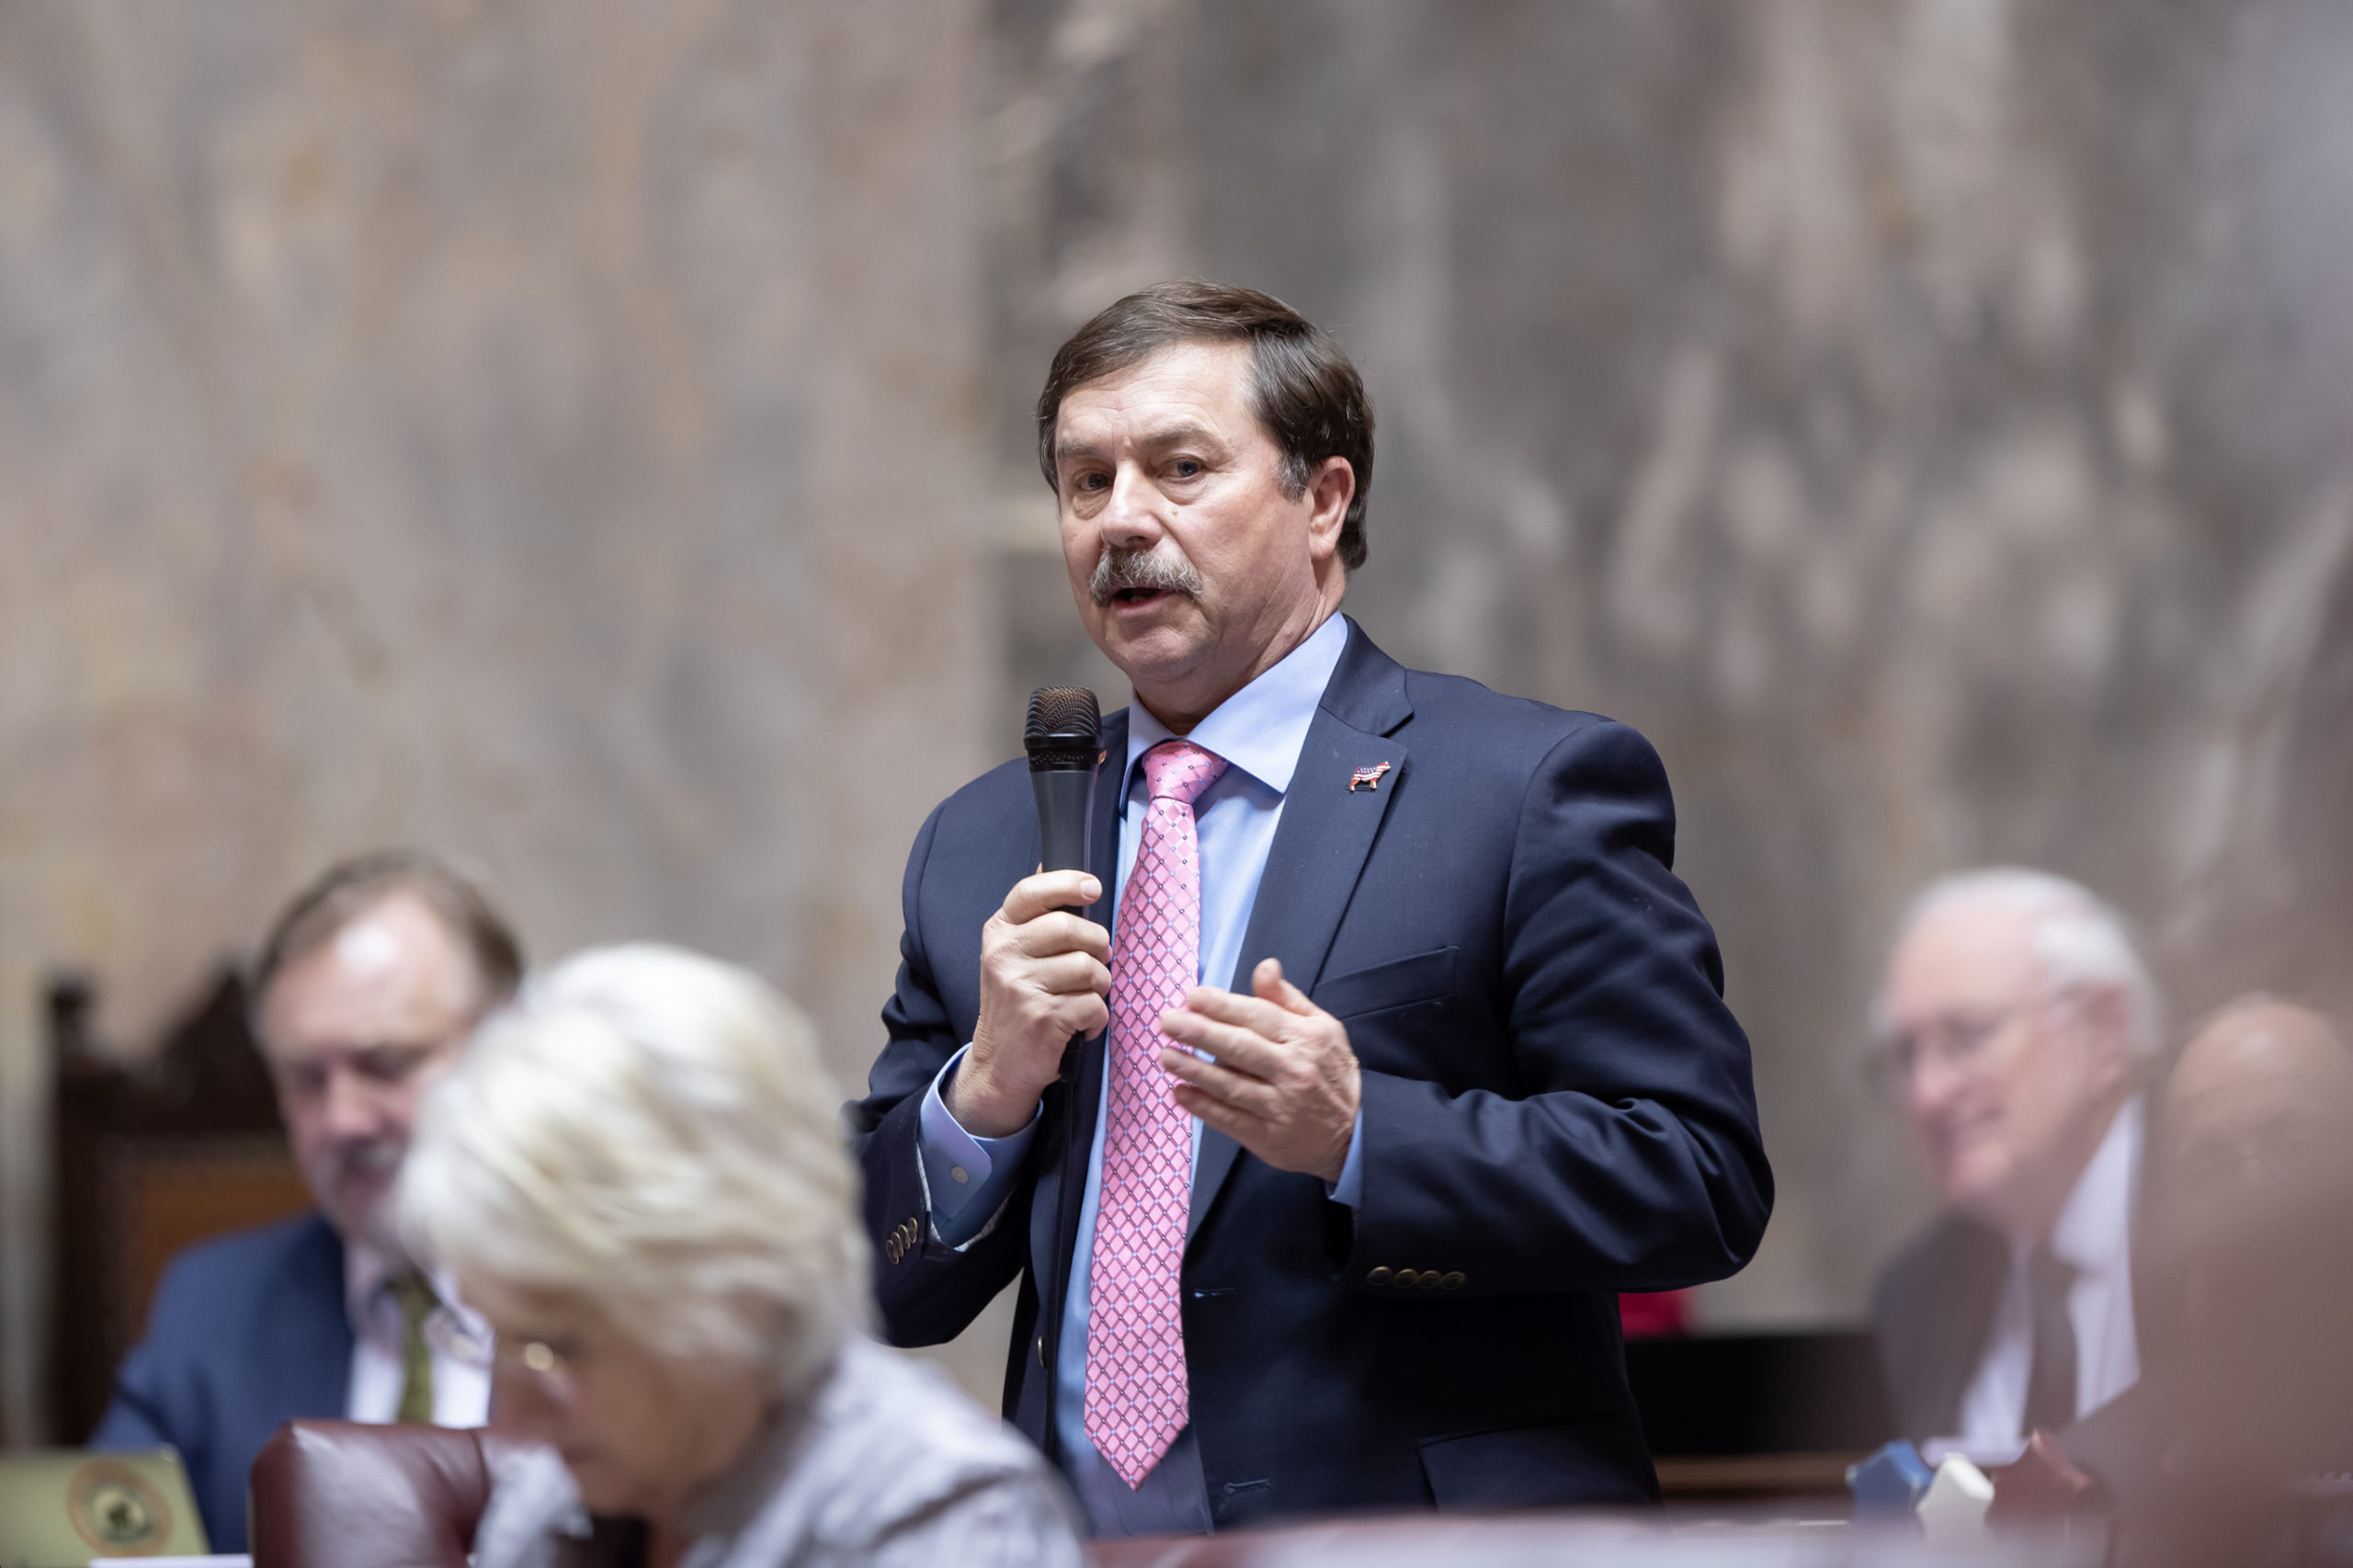 Relief package is a start, but no substitute for full Legislative response